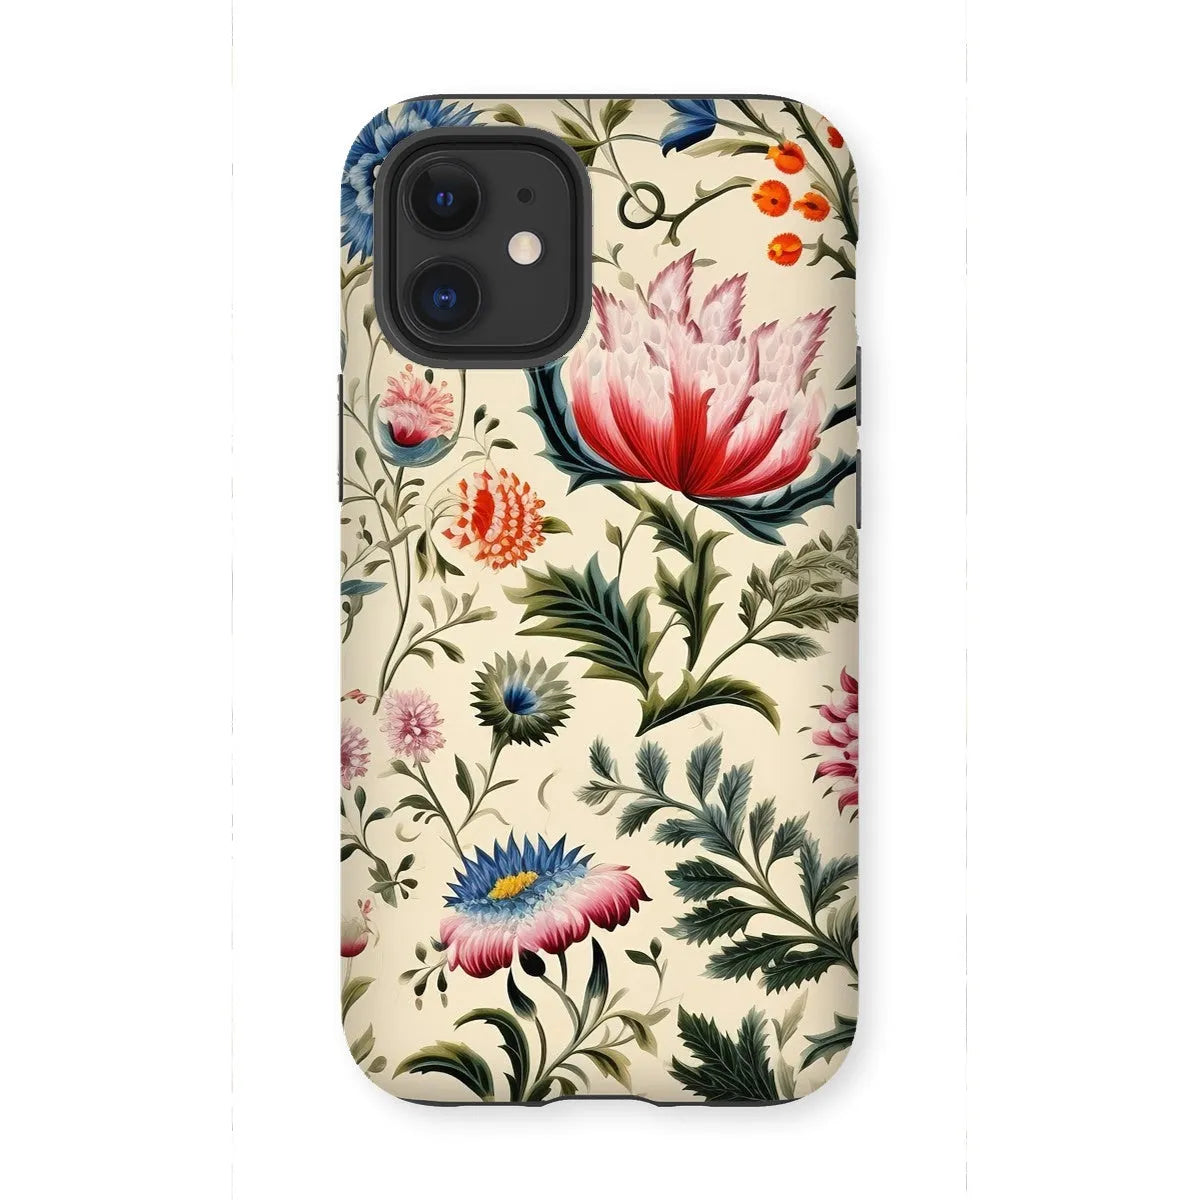 Wildflower Hoopla - Floral Garden Aesthetic Phone Case - Iphone 12 Mini / Matte - Mobile Phone Cases - Aesthetic Art